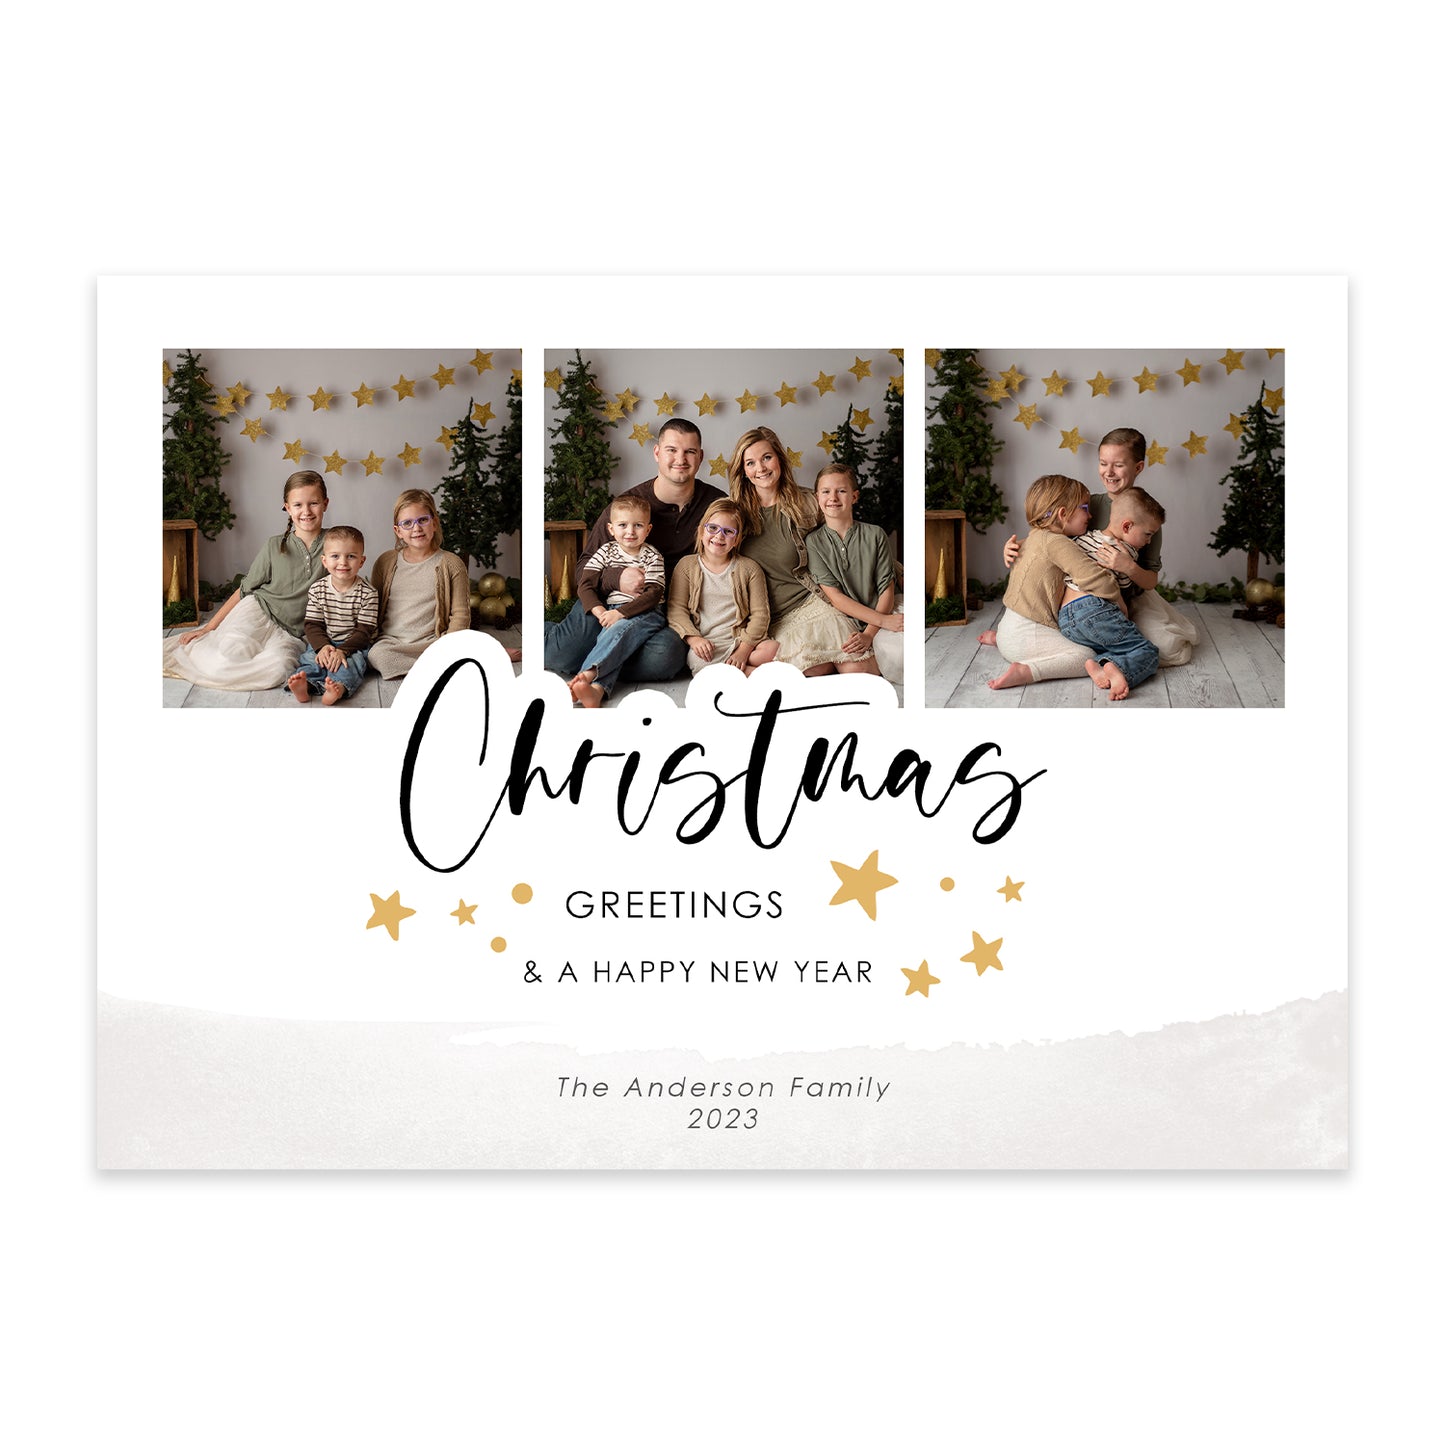 Bright Wishes Christmas Card